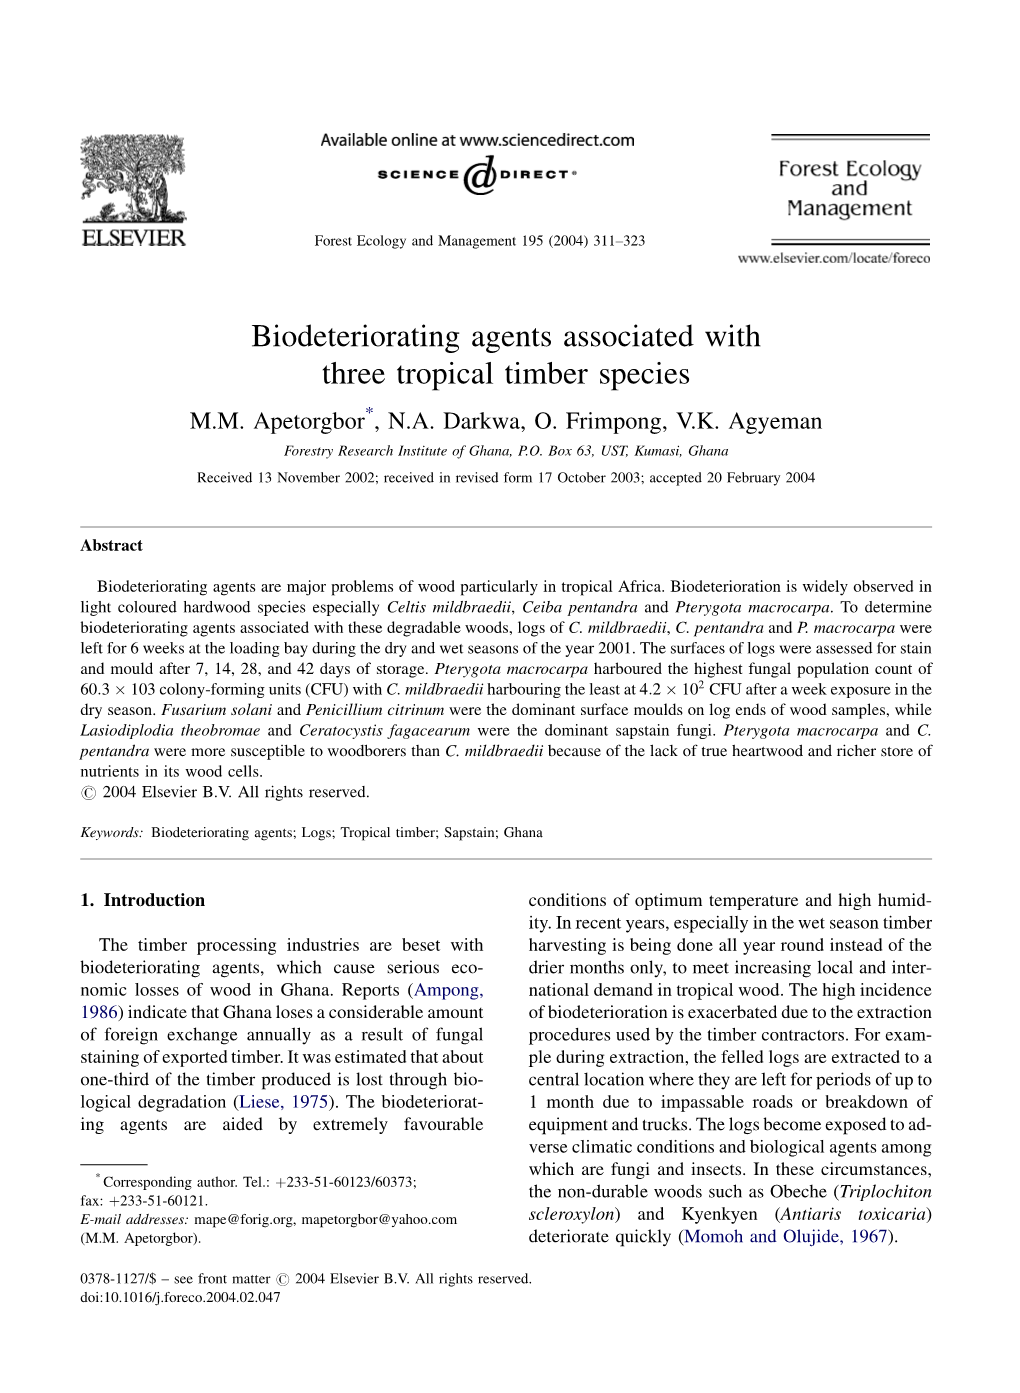 Biodeteriorating Agents Associated with Three Tropical Timber Species M.M